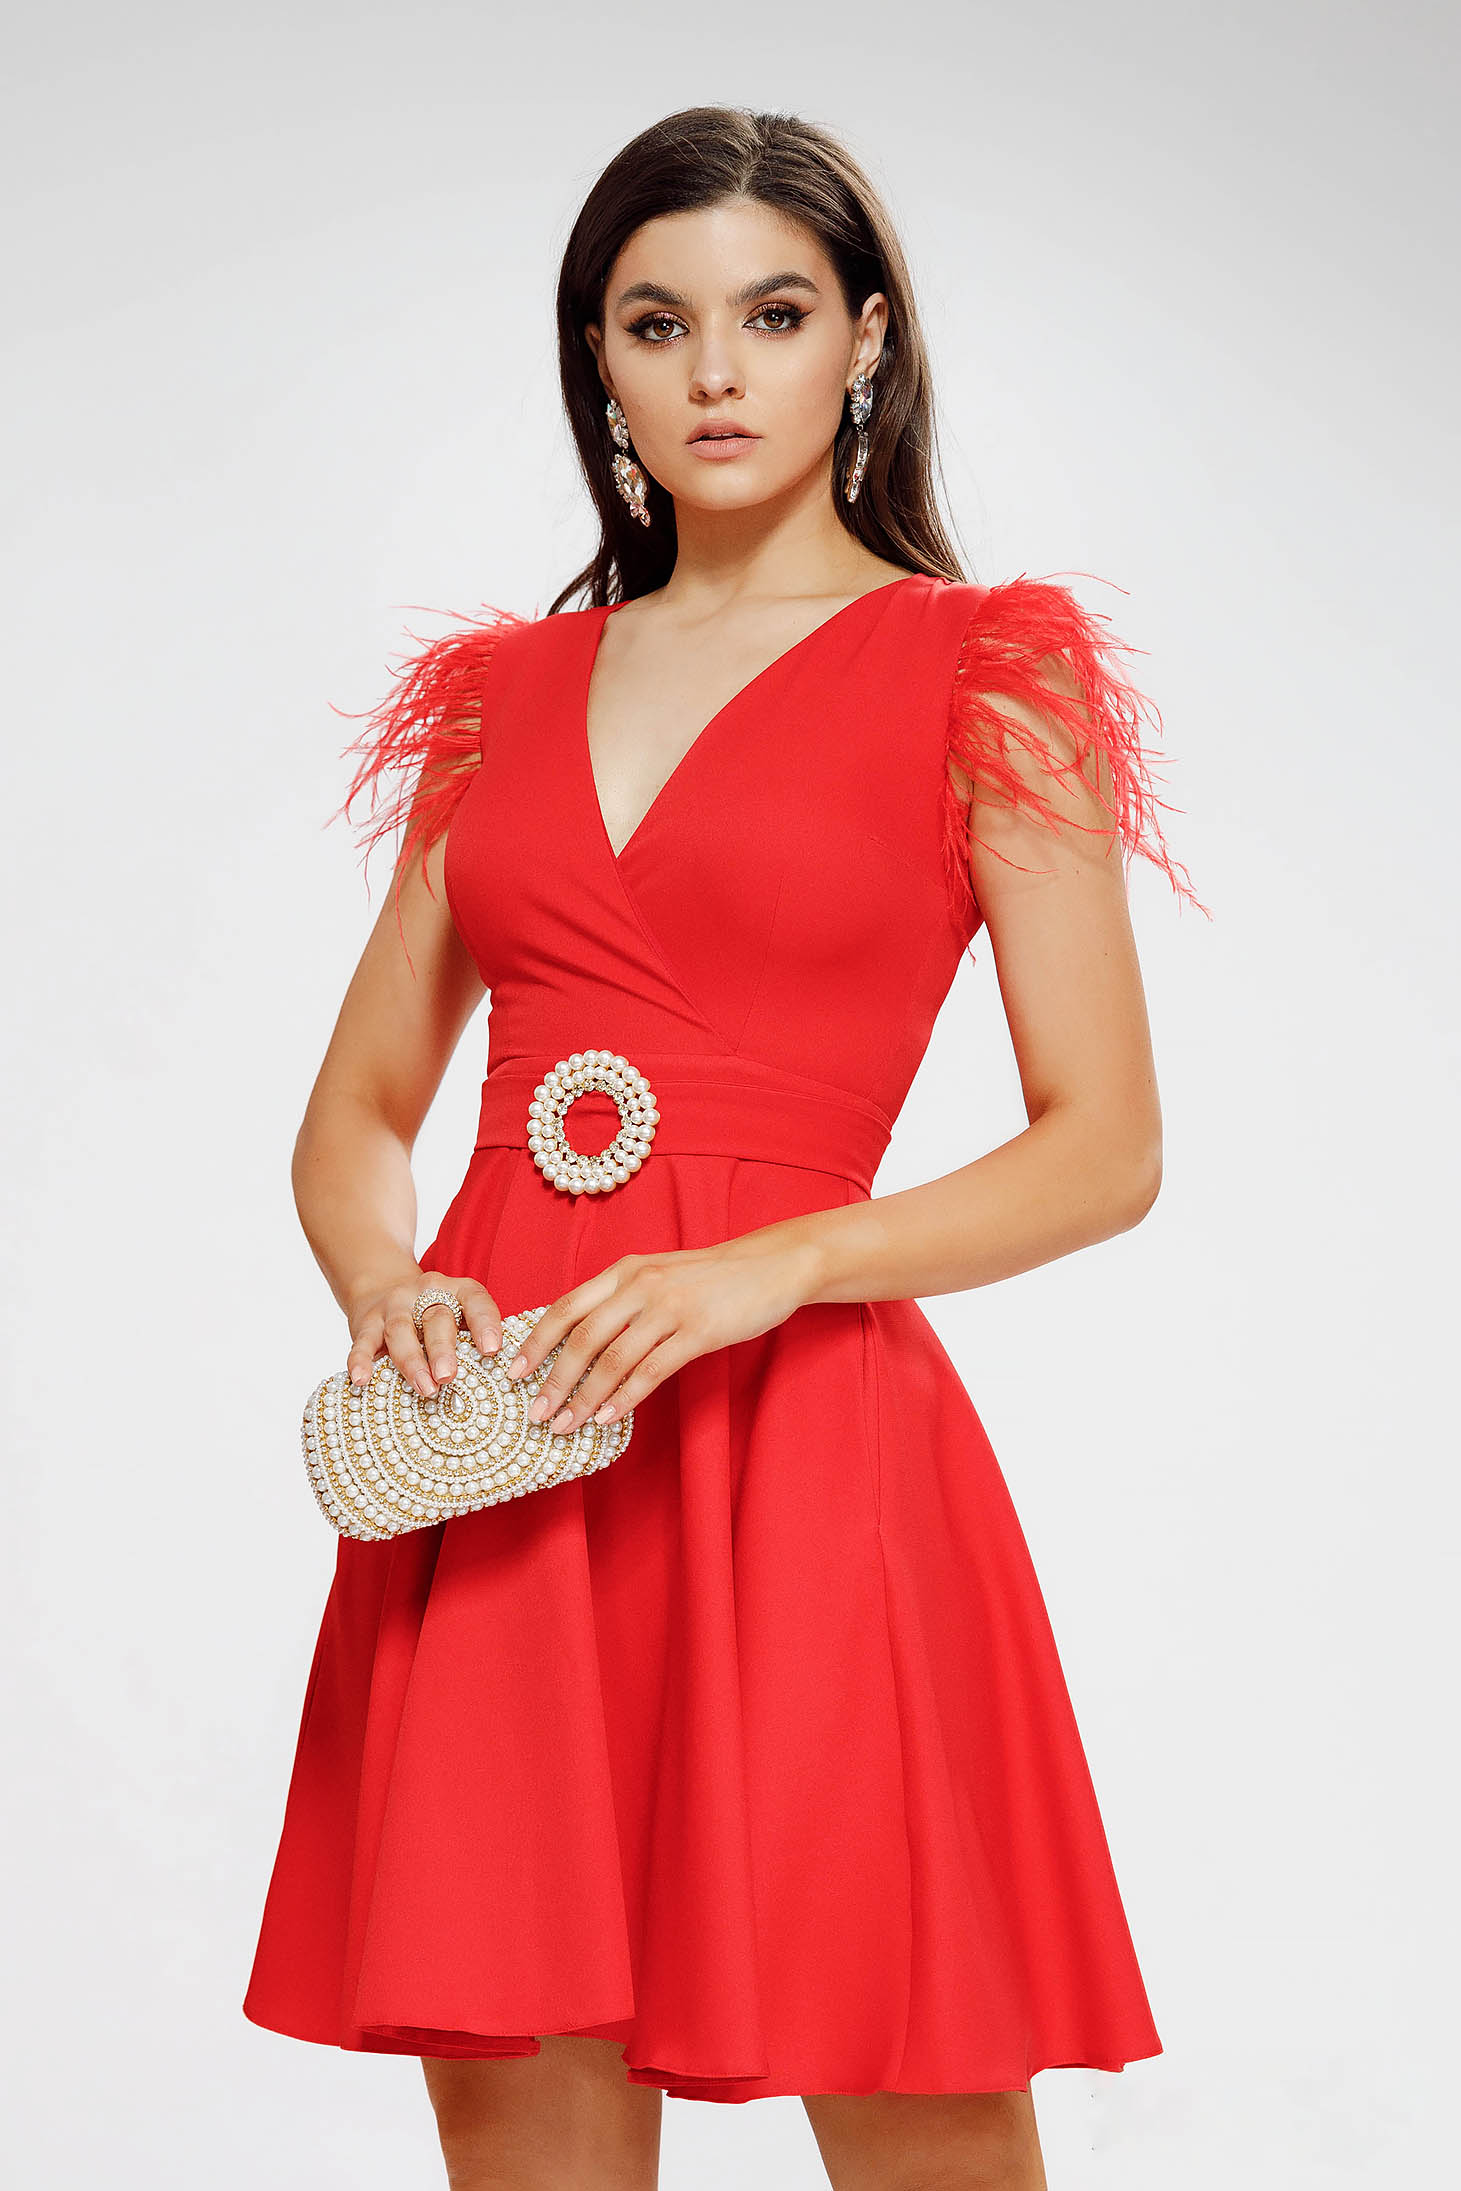 Red dress slightly elastic fabric midi cloche with pockets feather details office pencil short sleeve